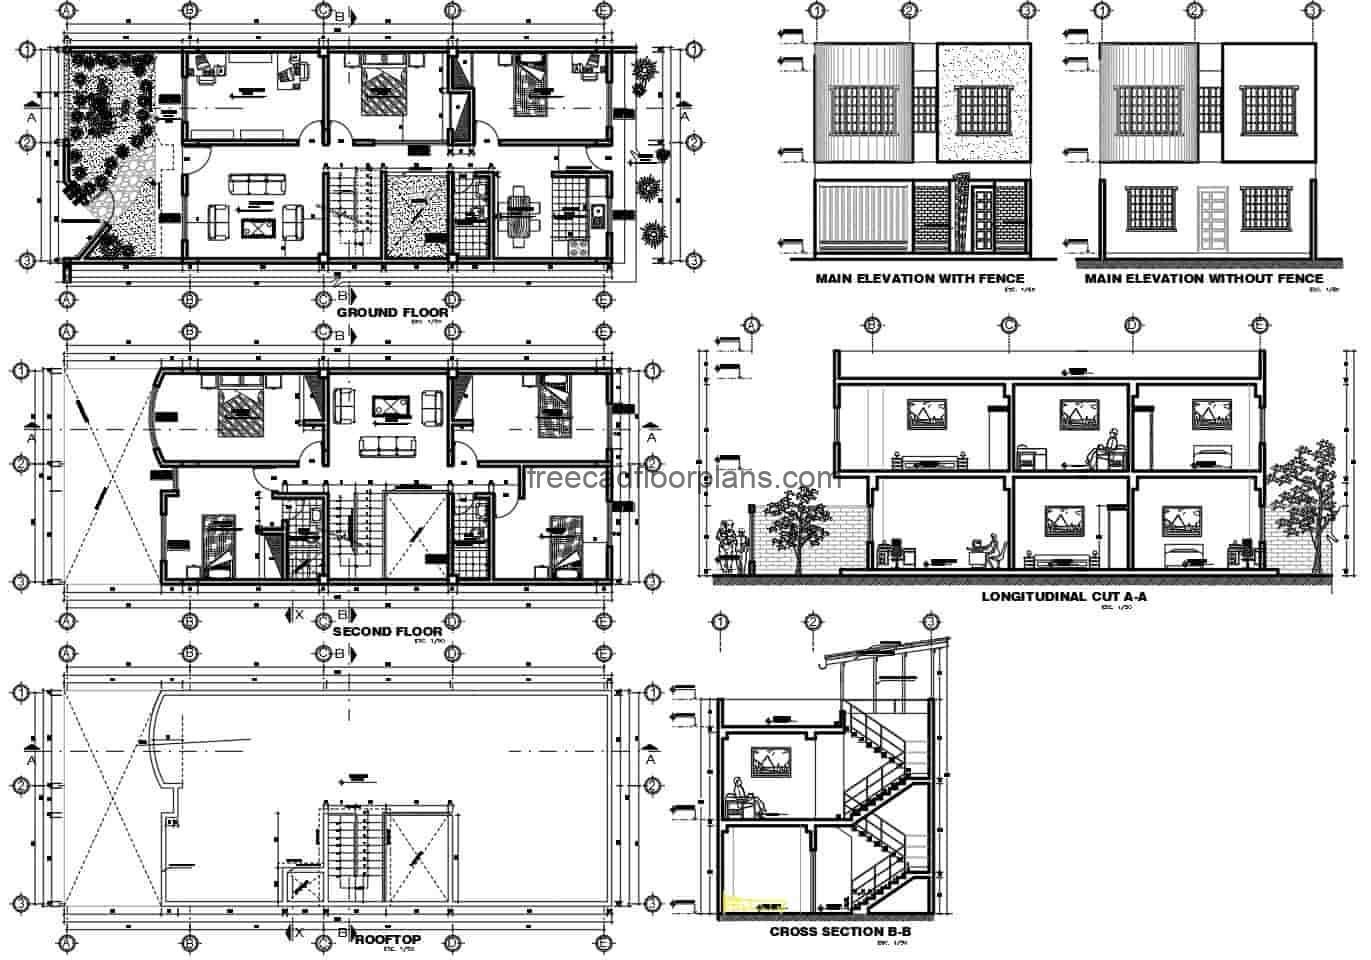 A complete project for a single family residence with four bedrooms on two levels, a social area on the first level with a garden, living room, kitchen, dining room, second level with four bedrooms. Plans with architectural design, elevations, sections and details of facade for free download in Autocad DWG format.